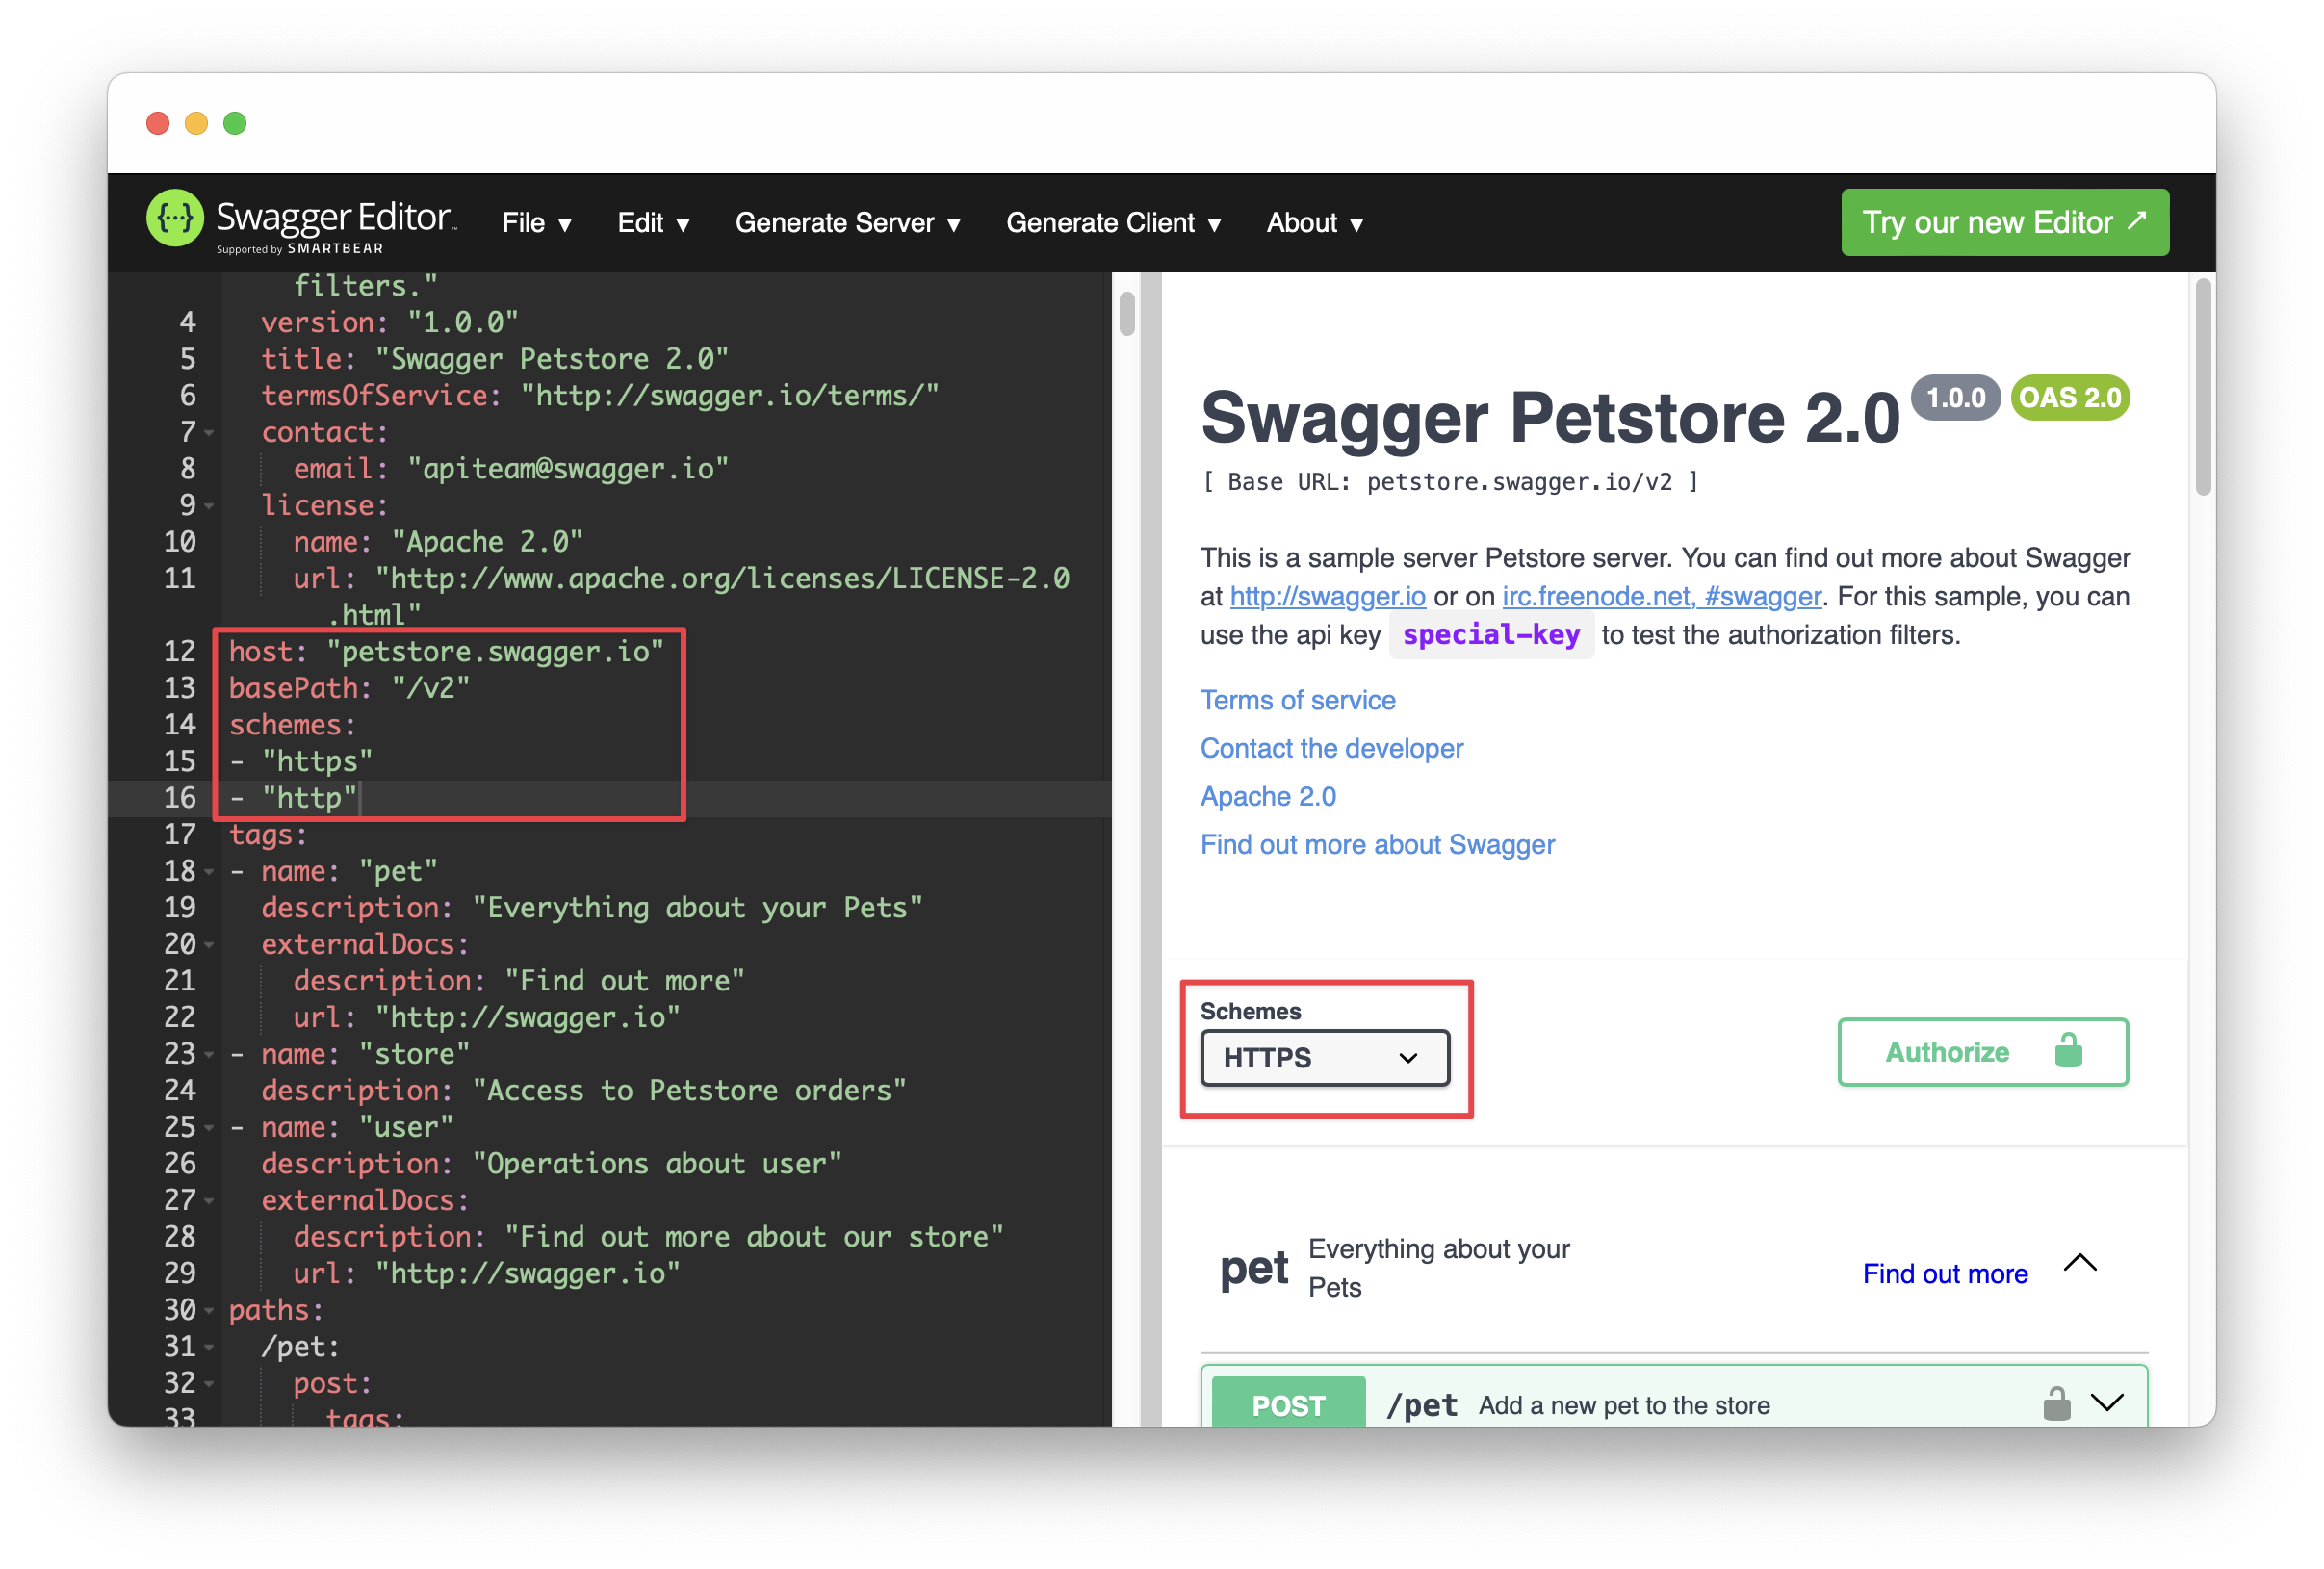 Screenshot of Swagger 2.0 editor showing the scheme selector as the only URL-related option